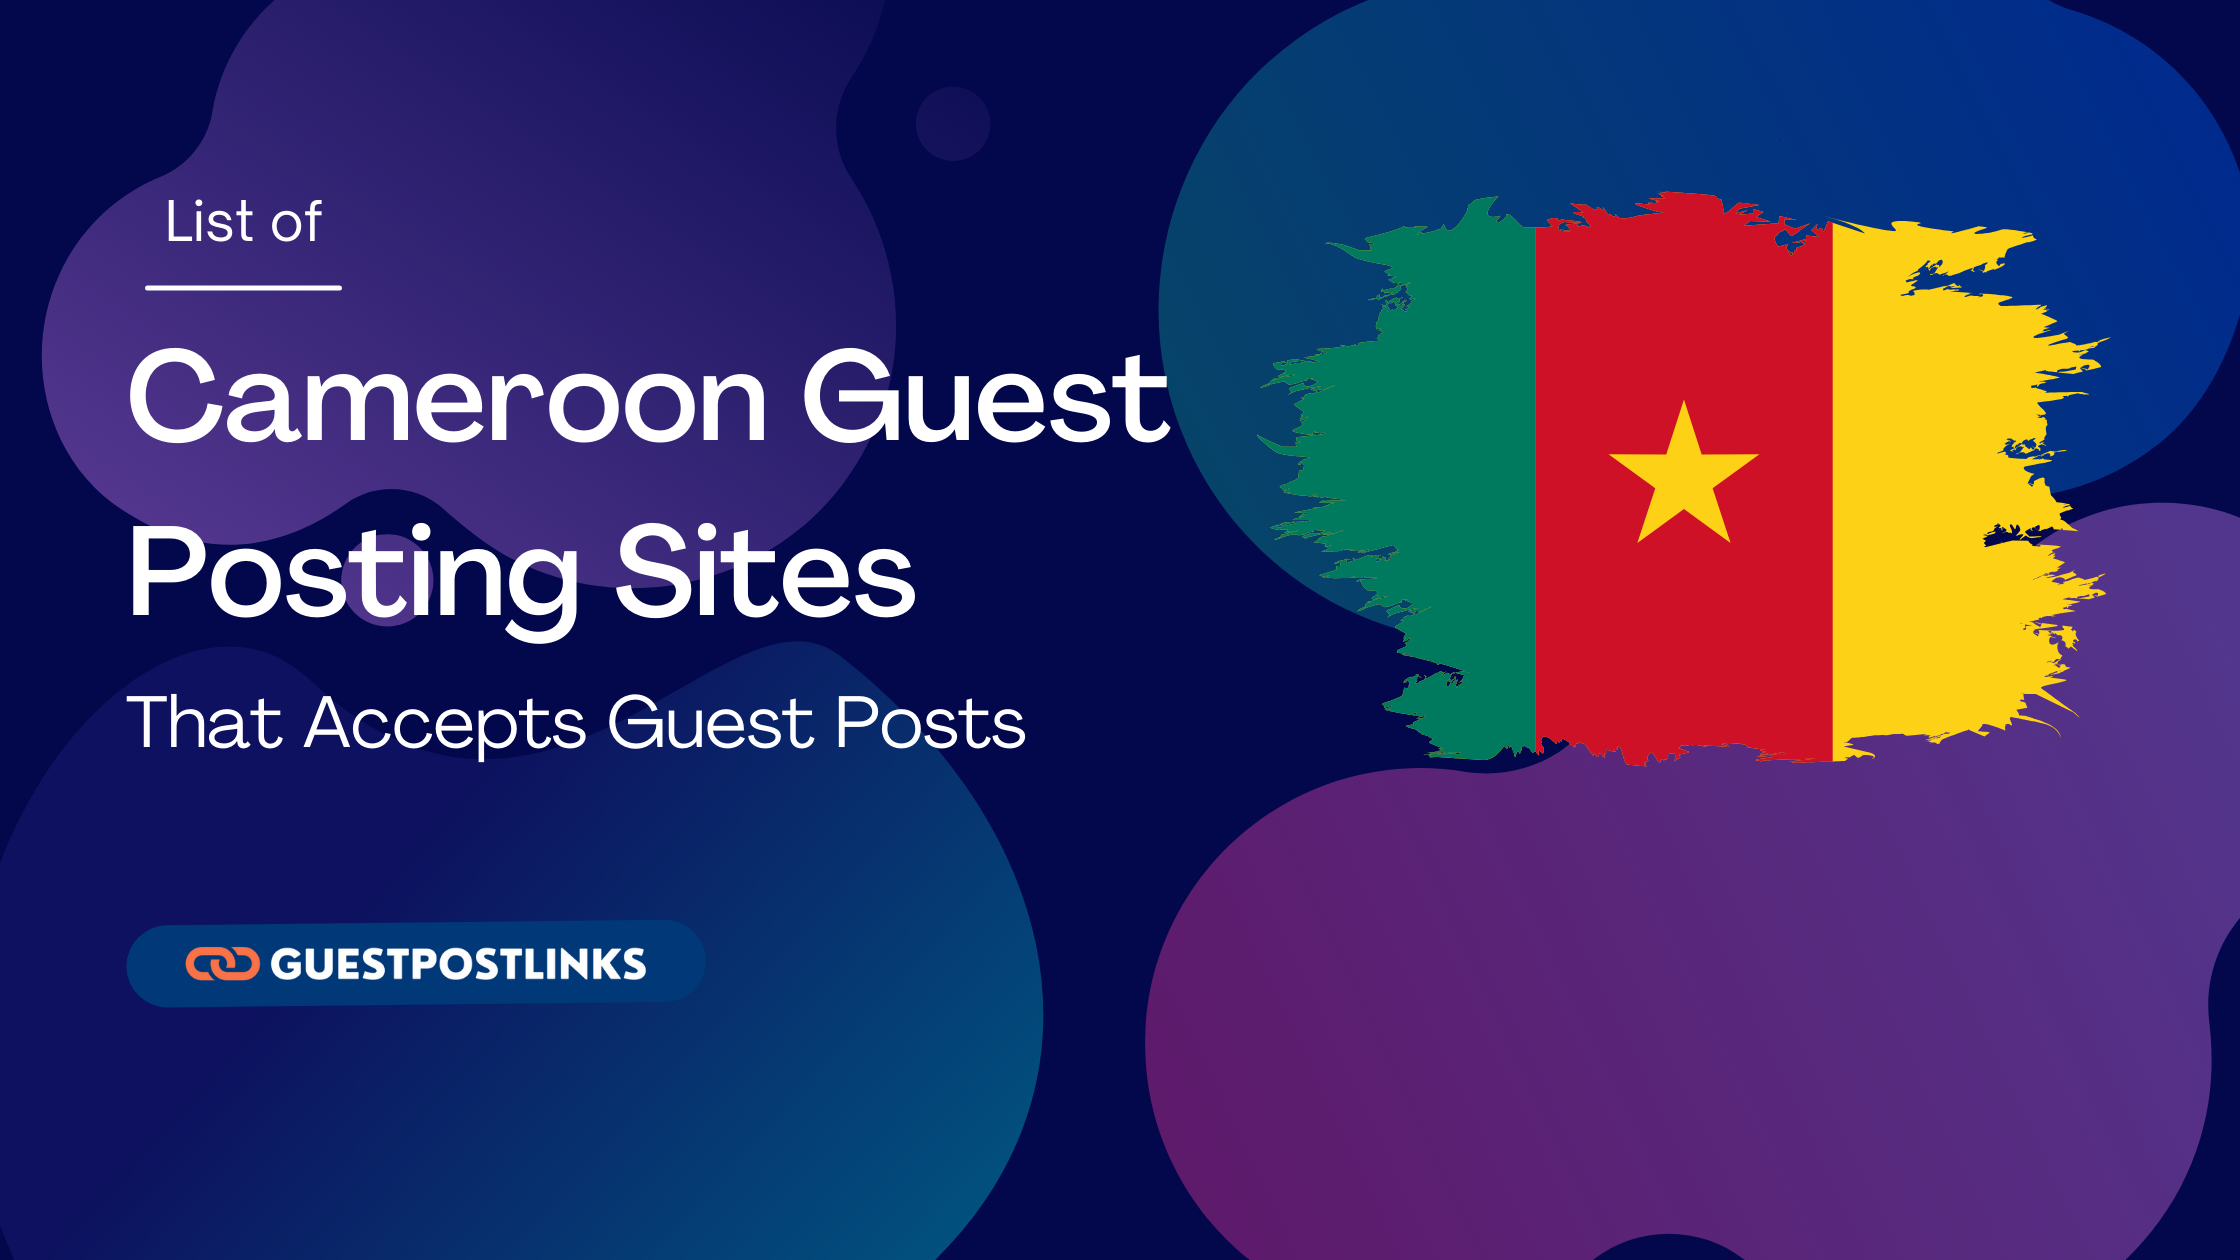 Cameroon Guest Posting Sites List